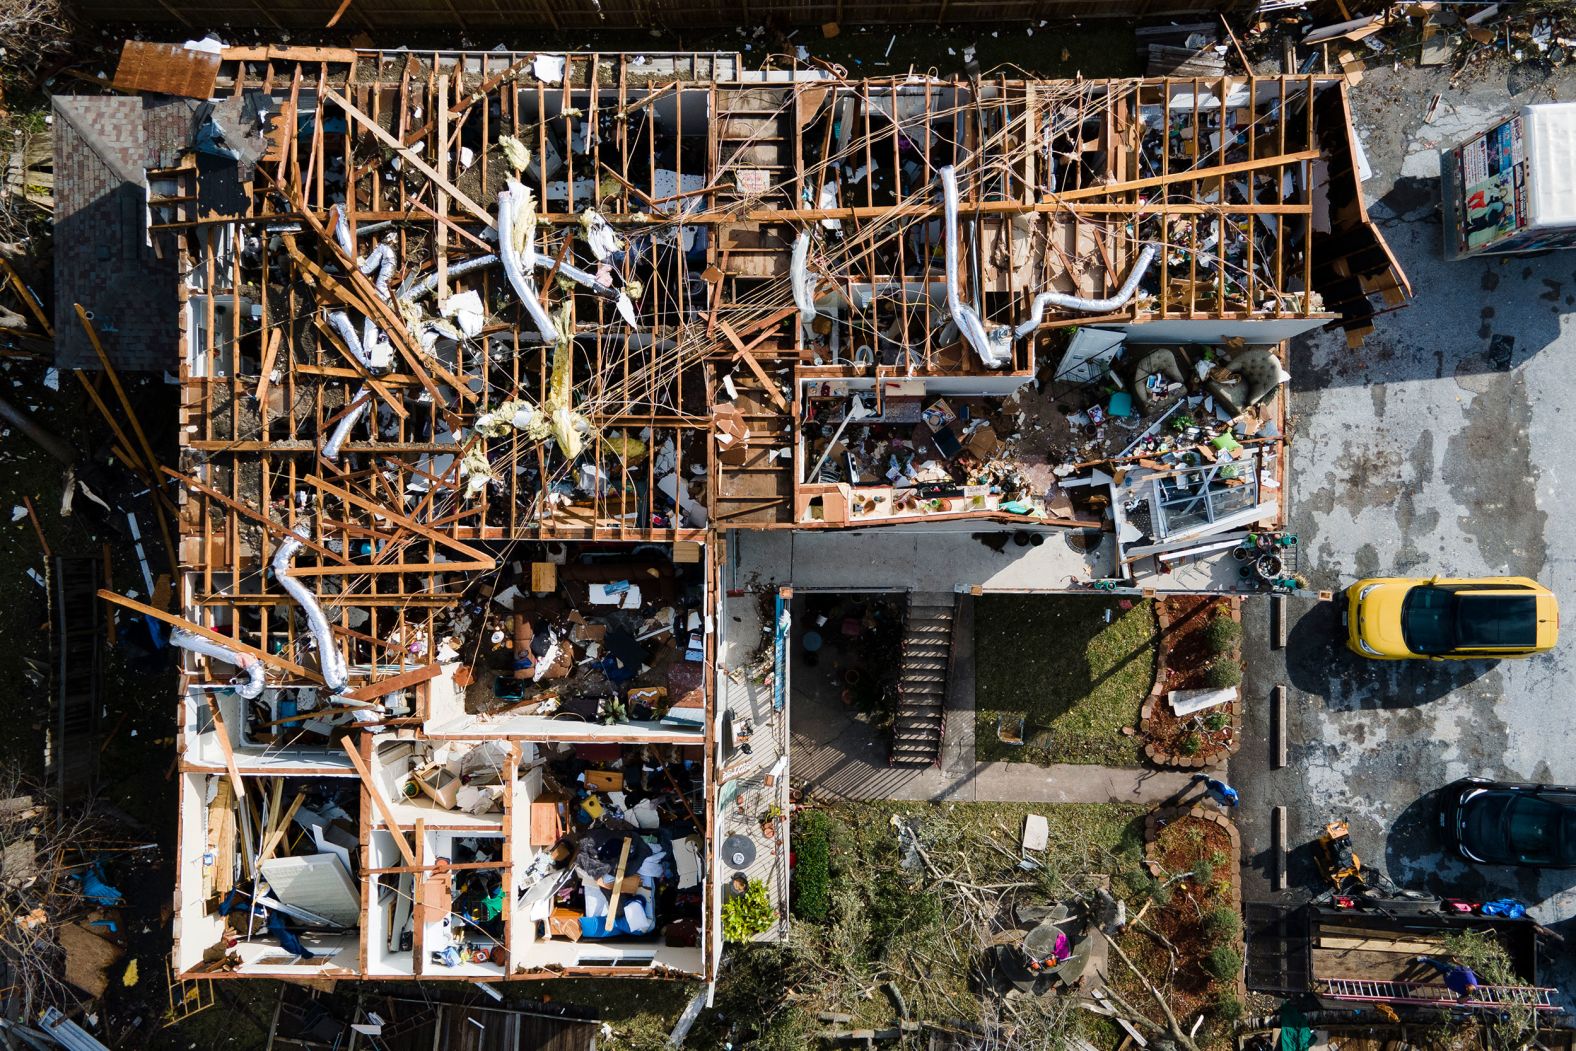 Damage is seen at an apartment complex in Deer Park, Texas, after a <a href="index.php?page=&url=https%3A%2F%2Fwww.cnn.com%2F2023%2F01%2F24%2Fus%2Fhouston-tornado-damage%2Findex.html" target="_blank">tornado moved through the area</a> on Wednesday, January 25.